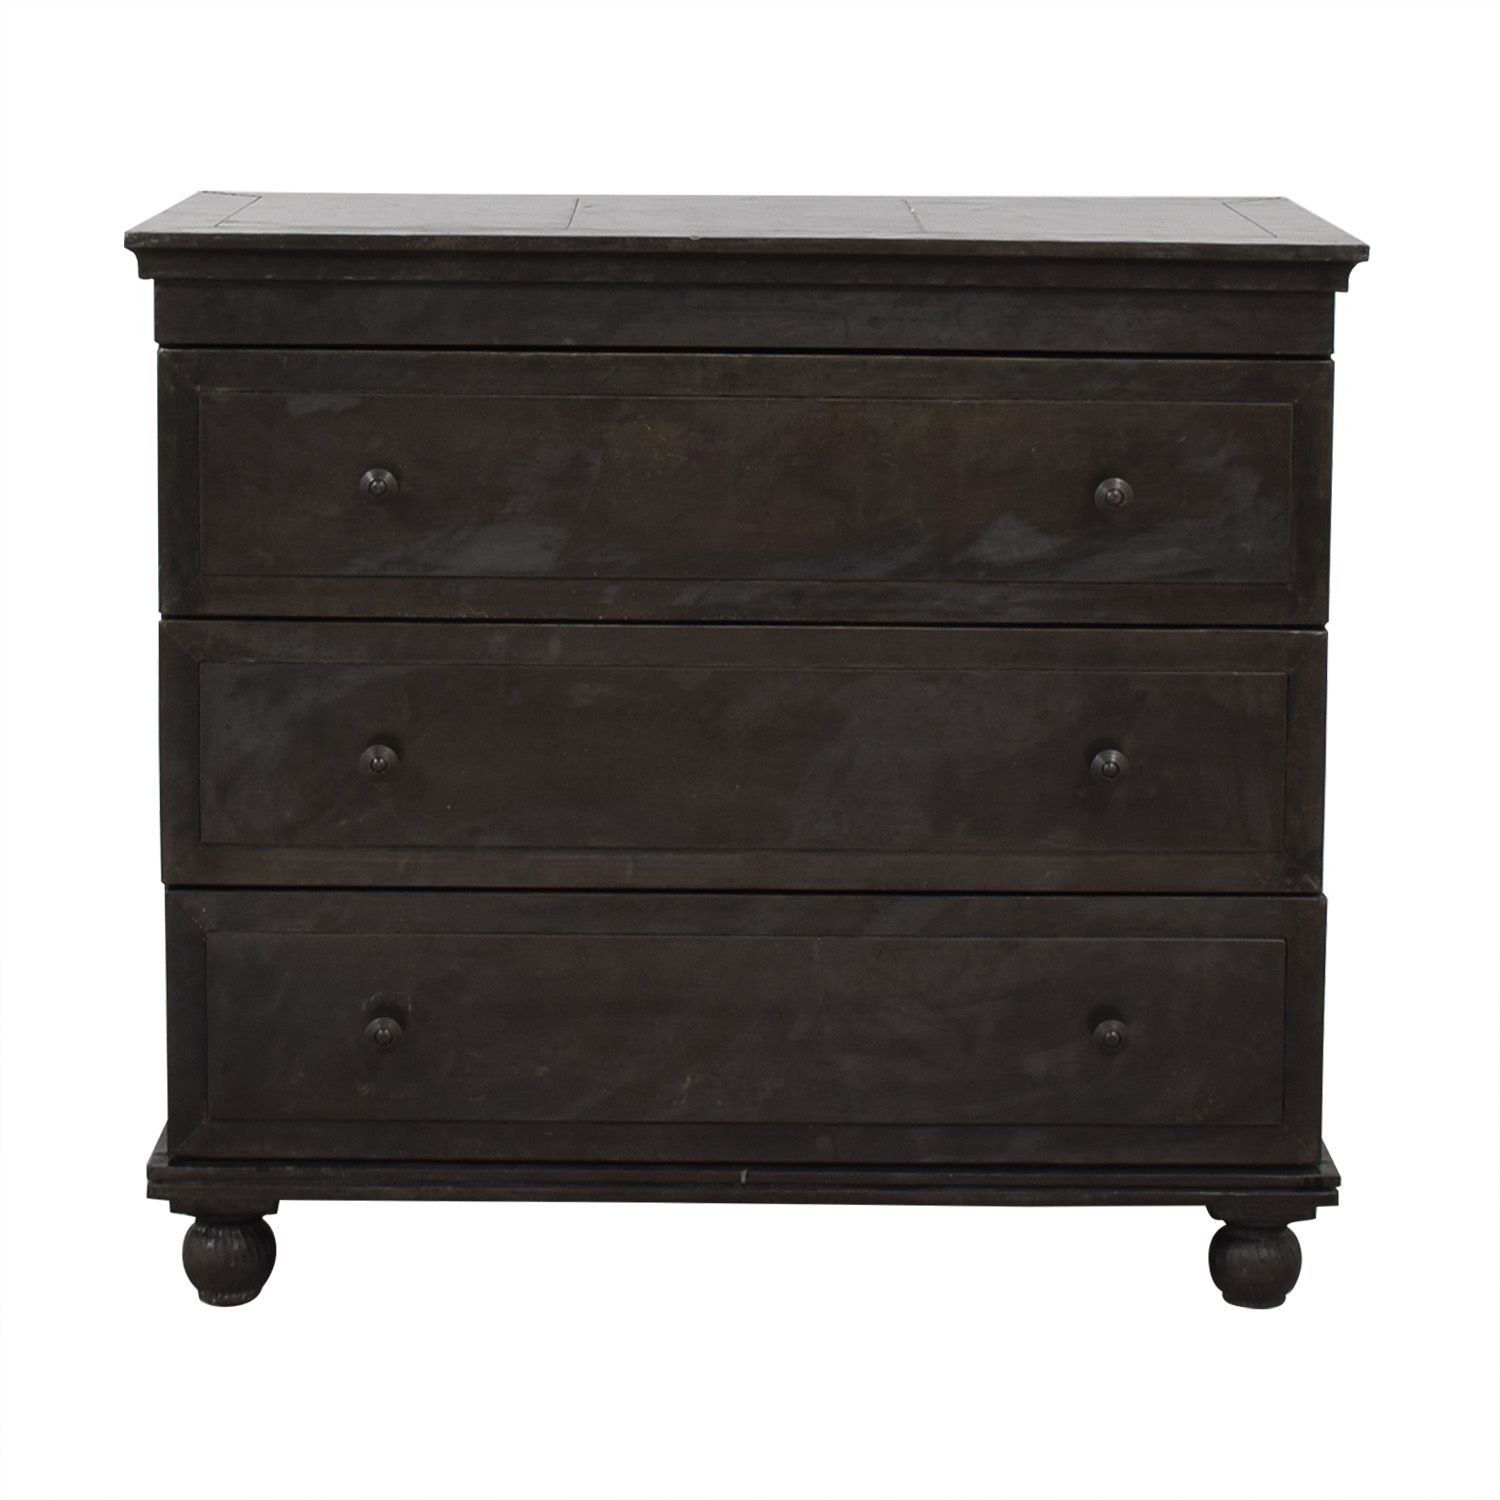 71% Off – Restoration Hardware Restoration Hardware Annecy Dresser / Storage Within Most Recent Annecy Sideboards (View 14 of 20)